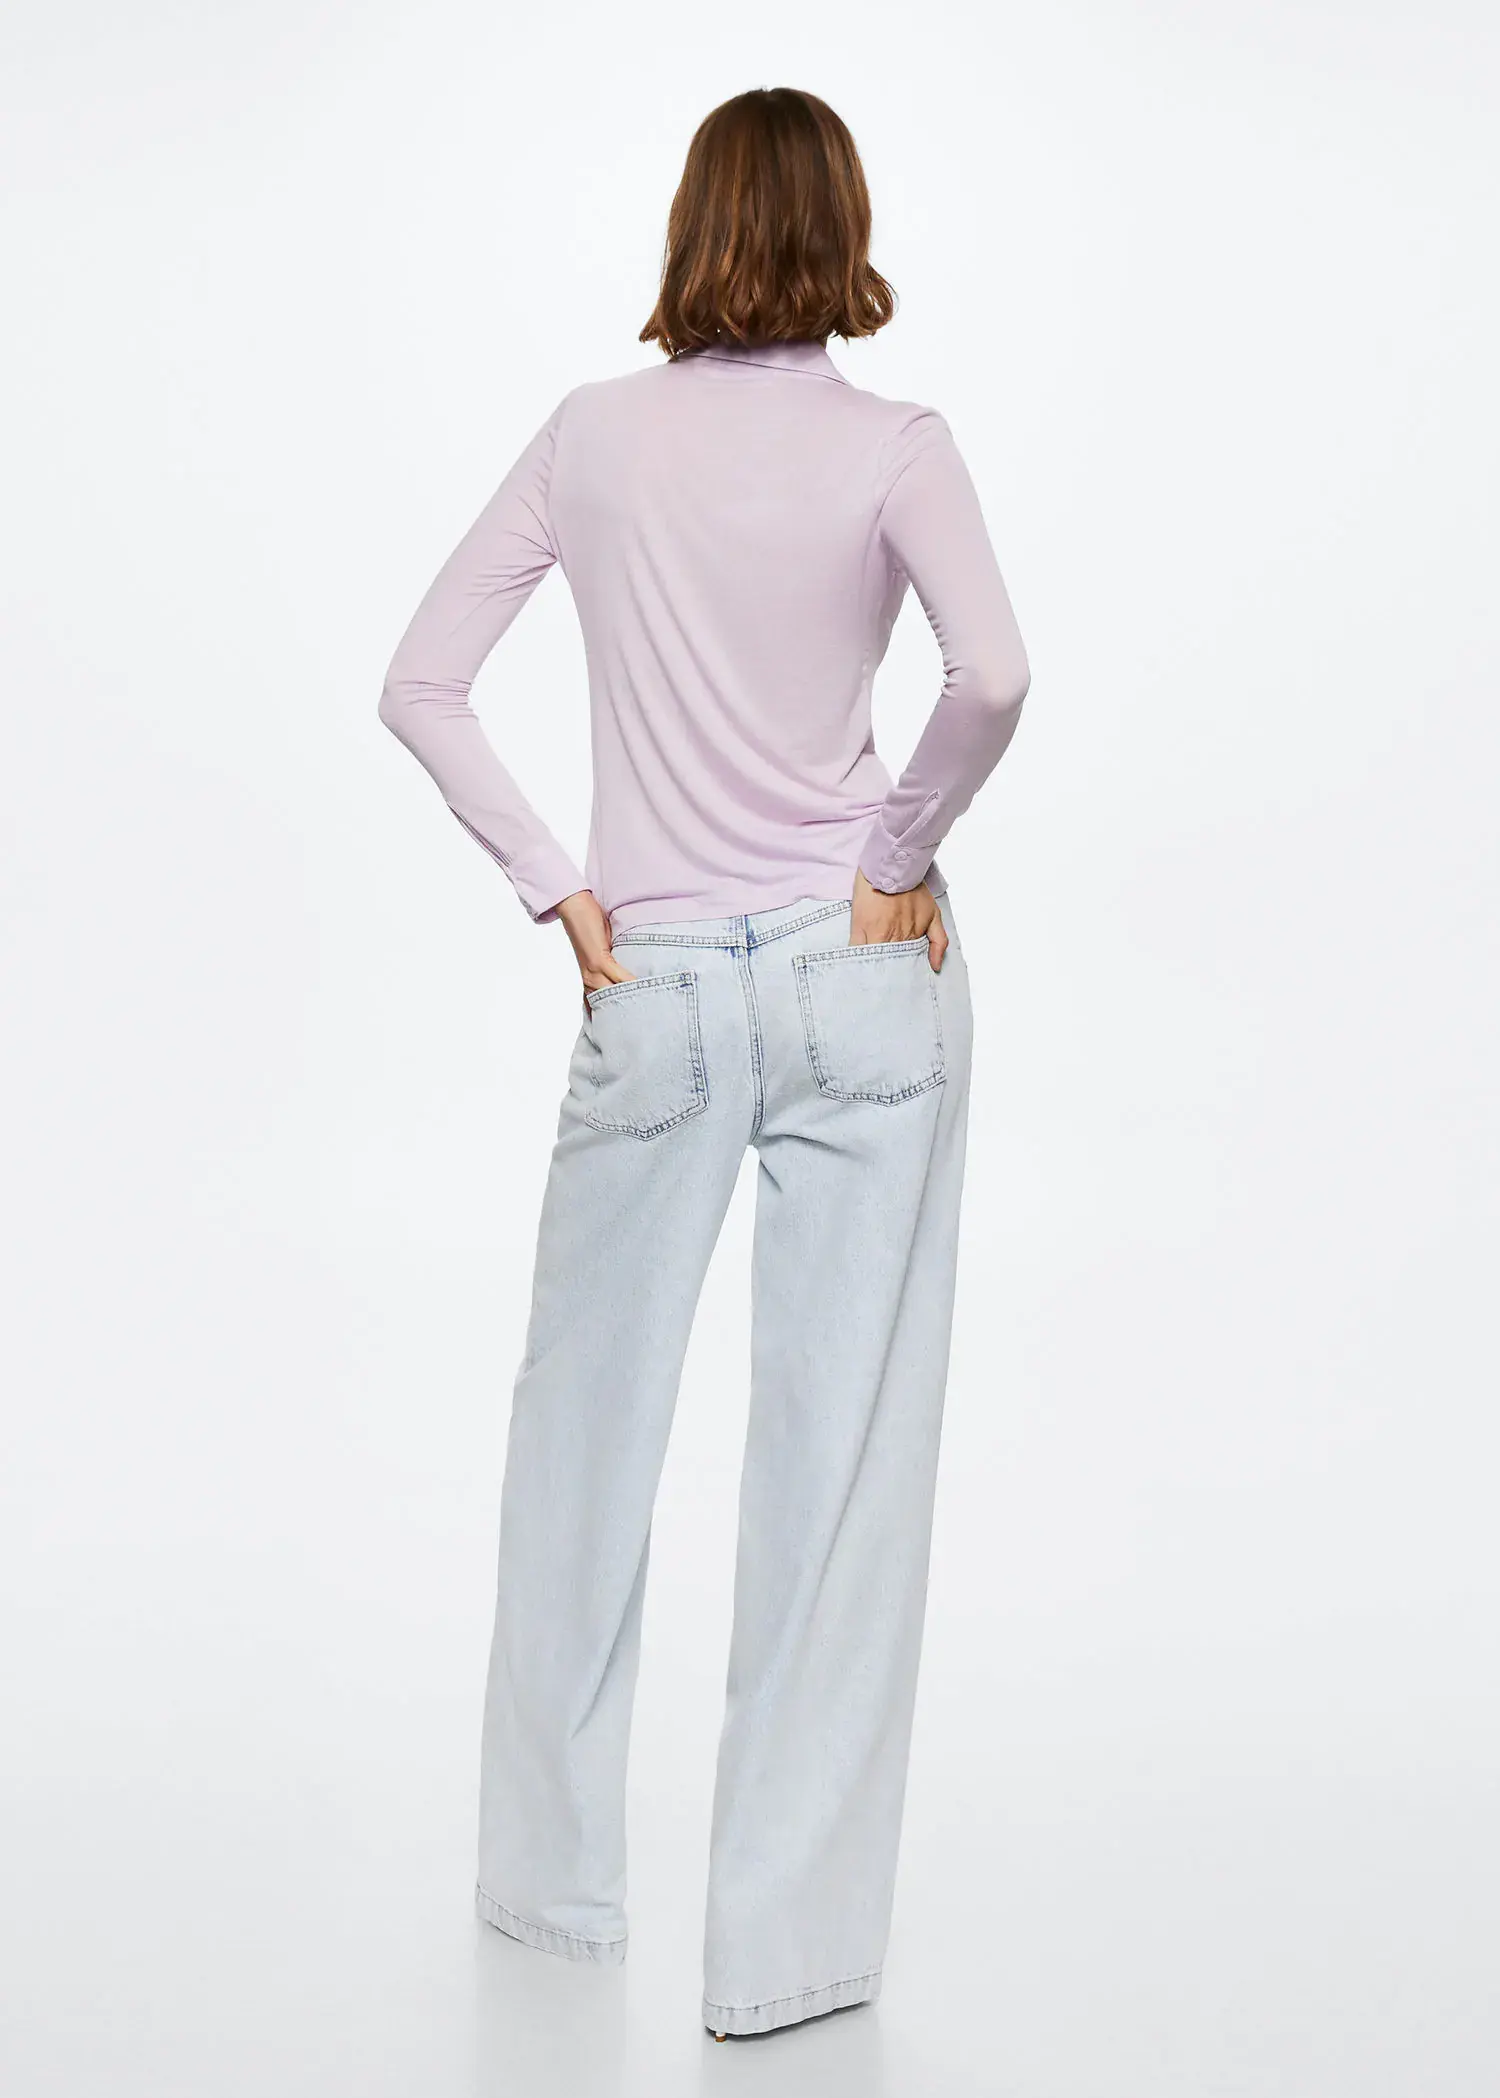 Mango Fine knit shirt. a woman standing with her hands on her hips. 